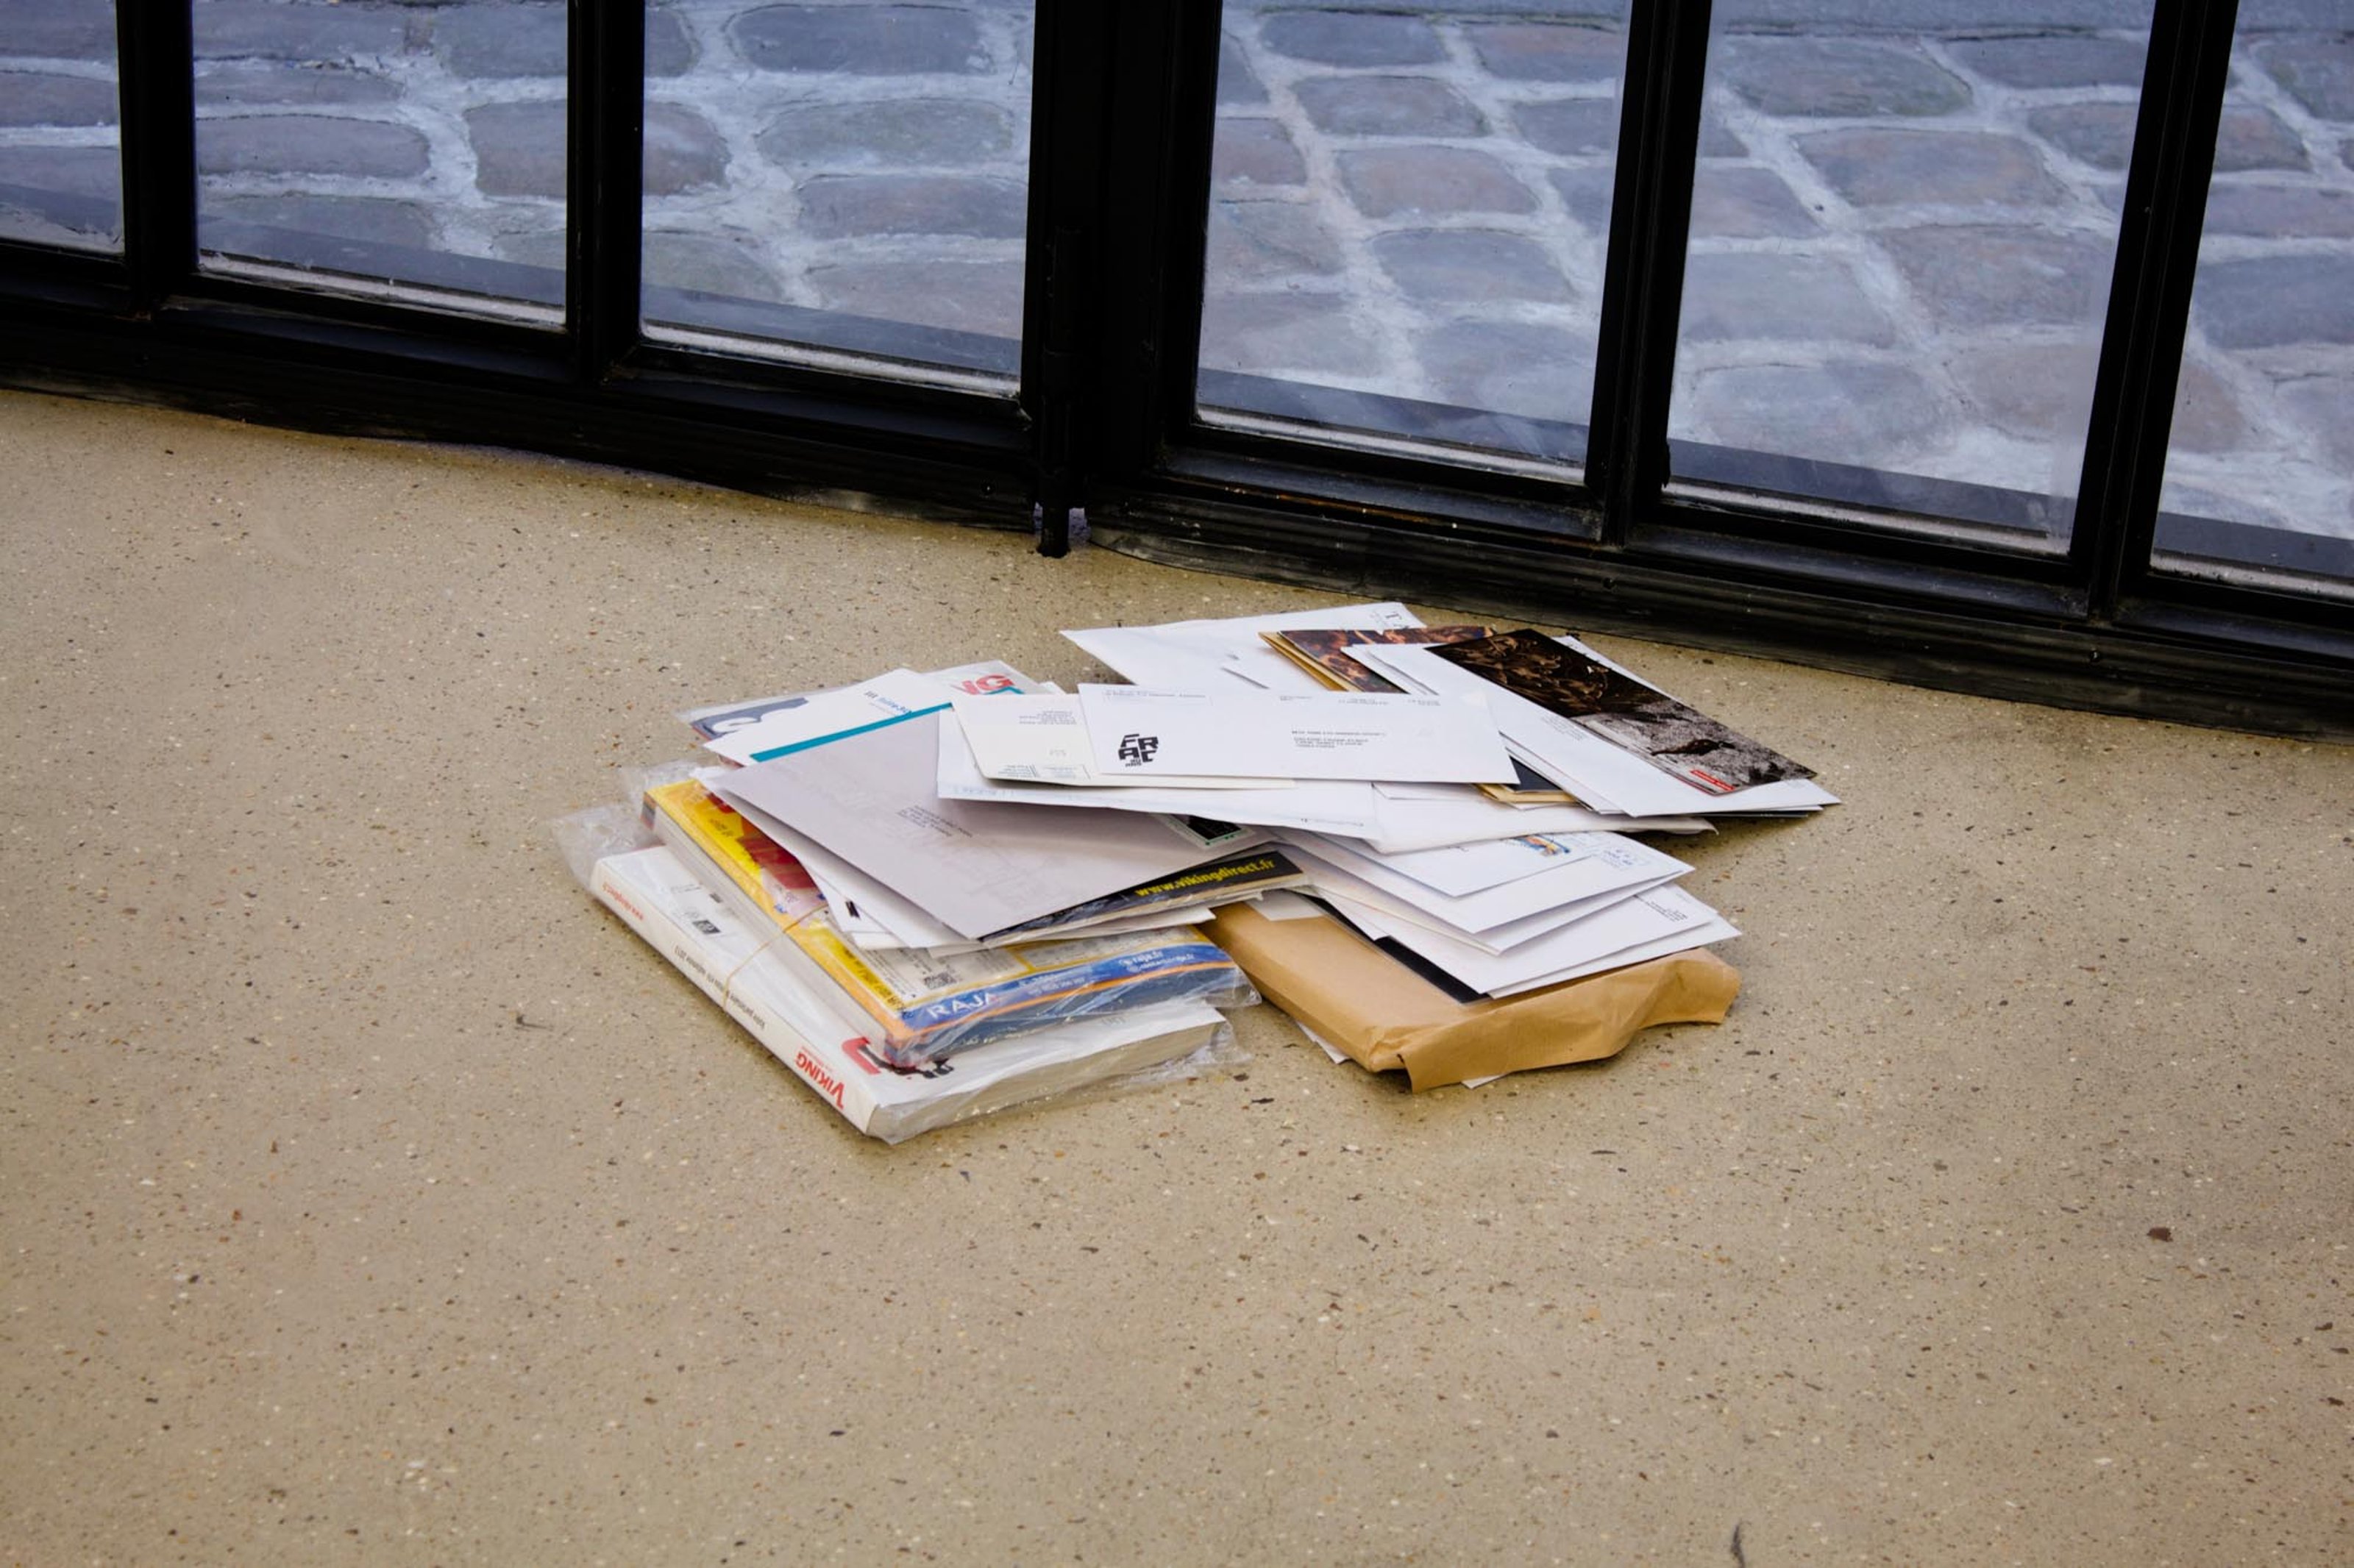 Gallery mail accumulated at the door, unopened for the exhibition duration.